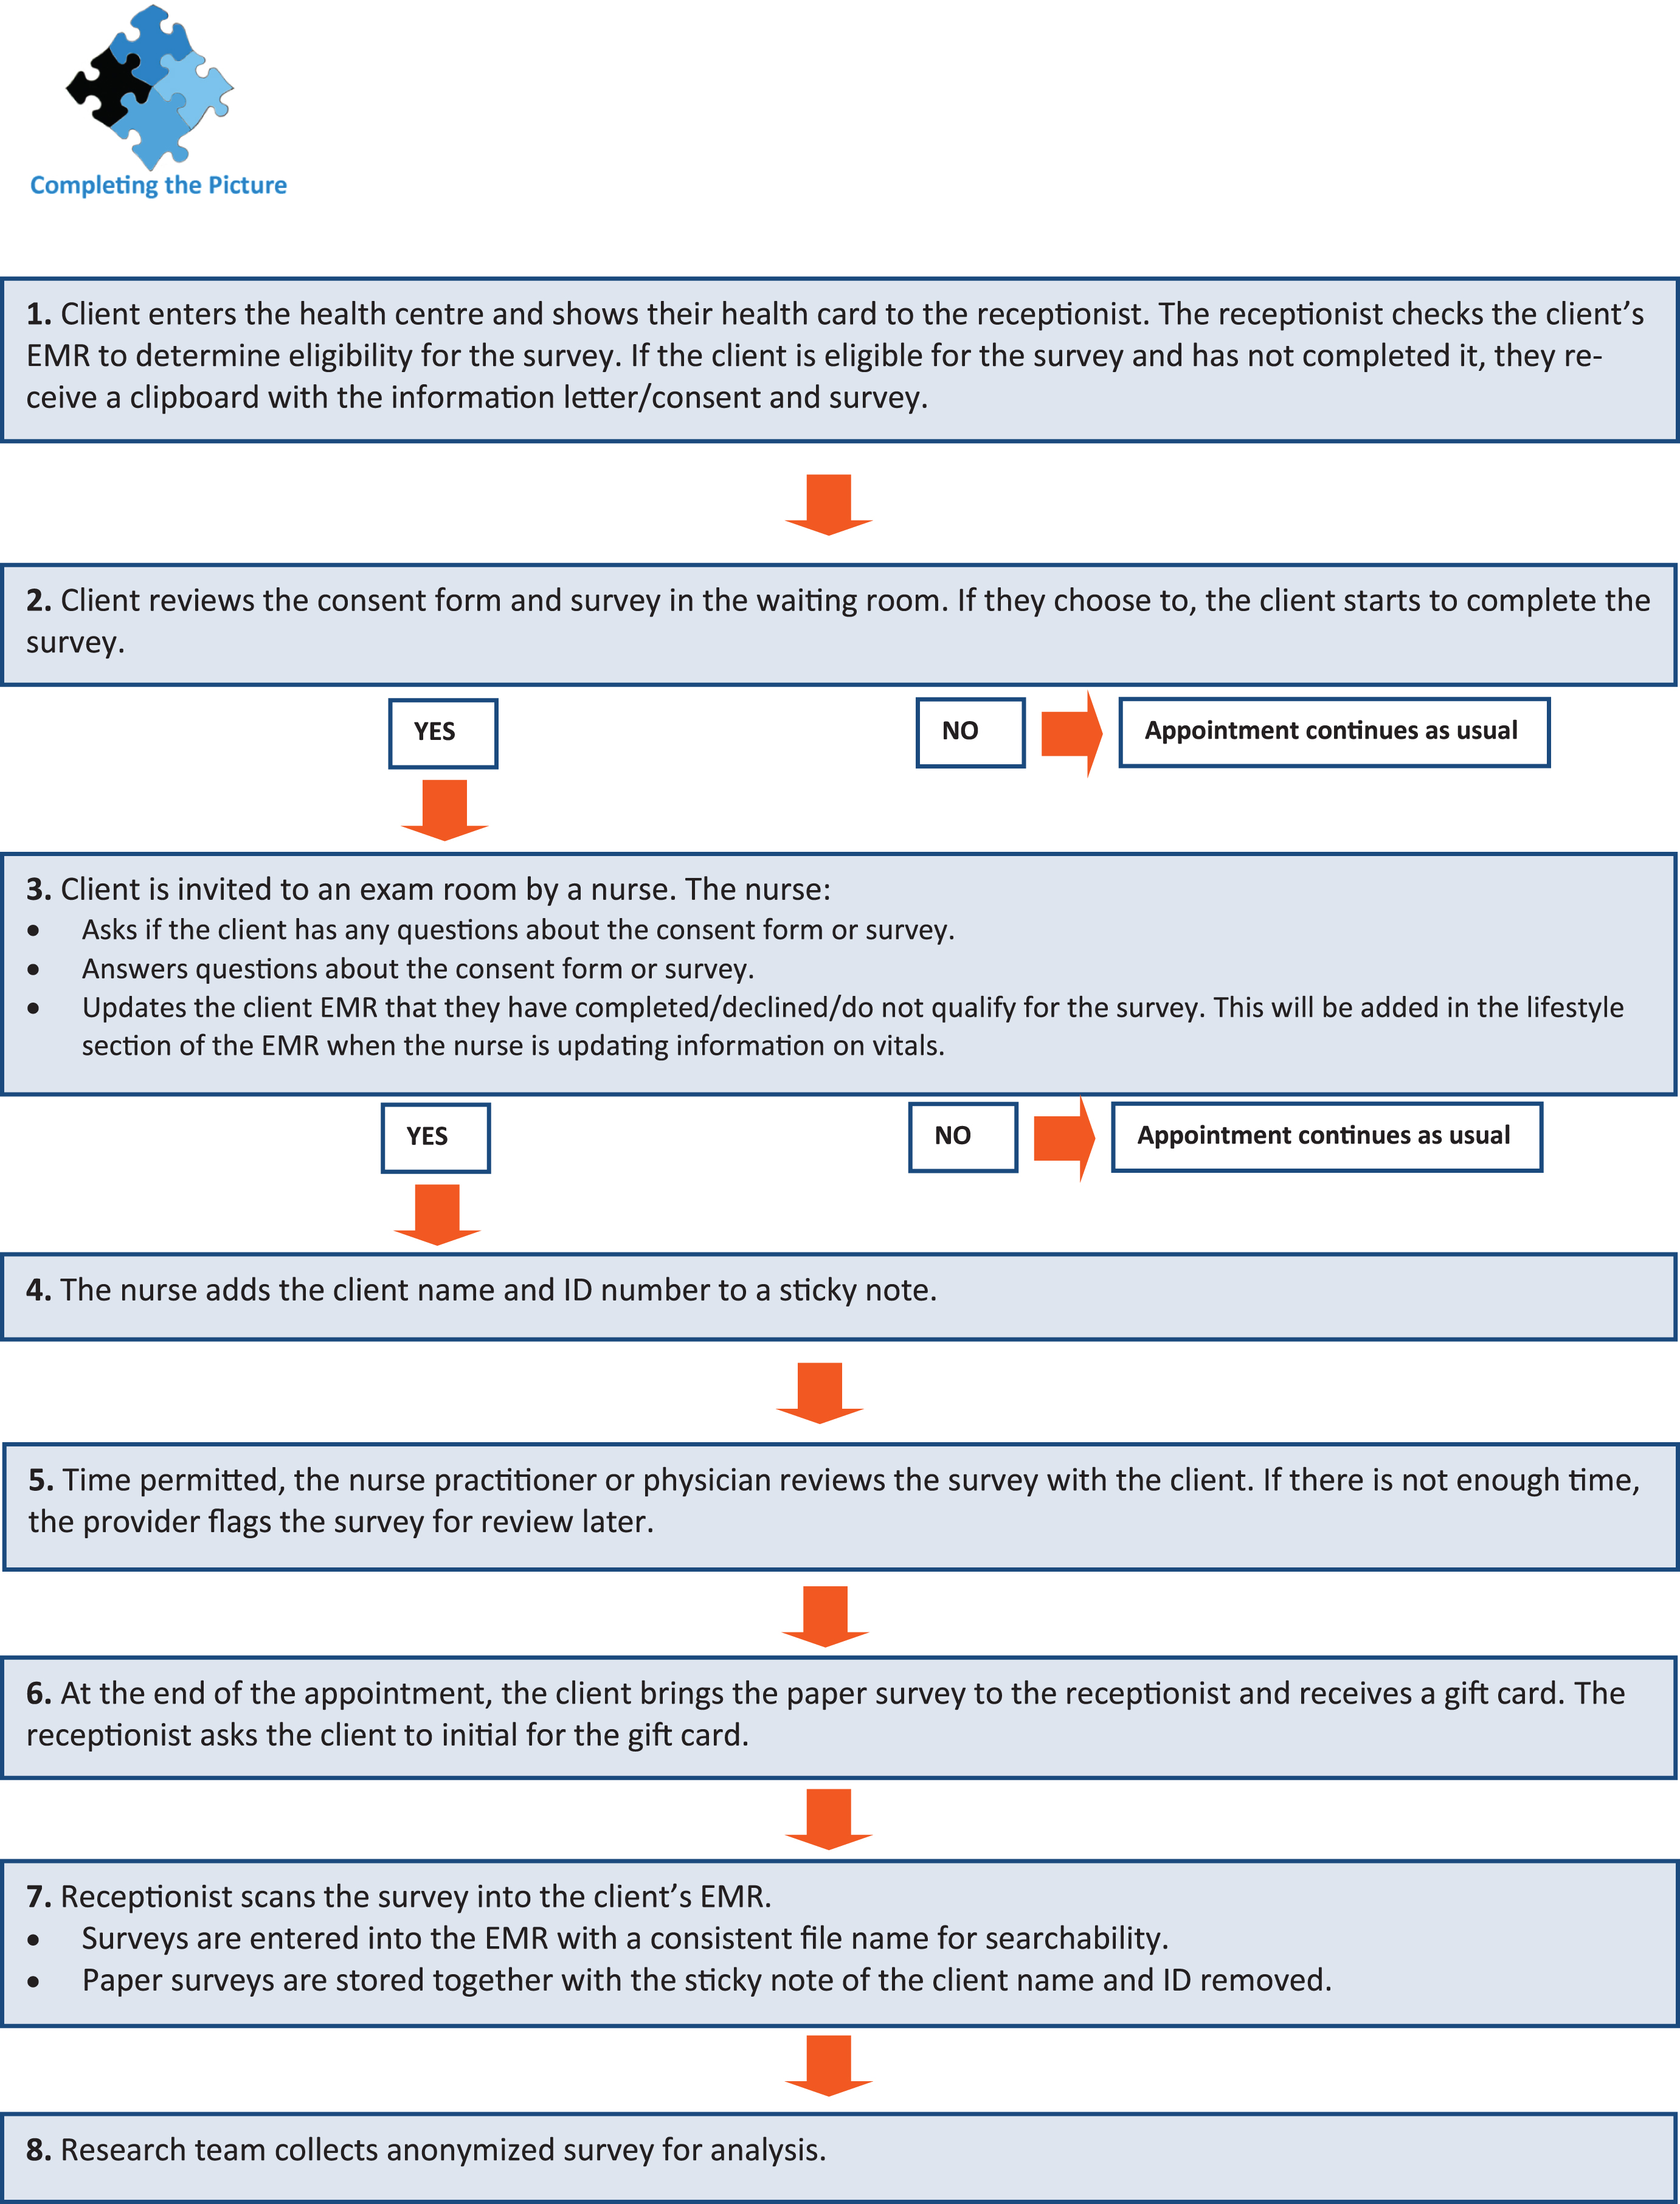 Sample Process Map for Work Exposure Survey Trial at Health Centre.